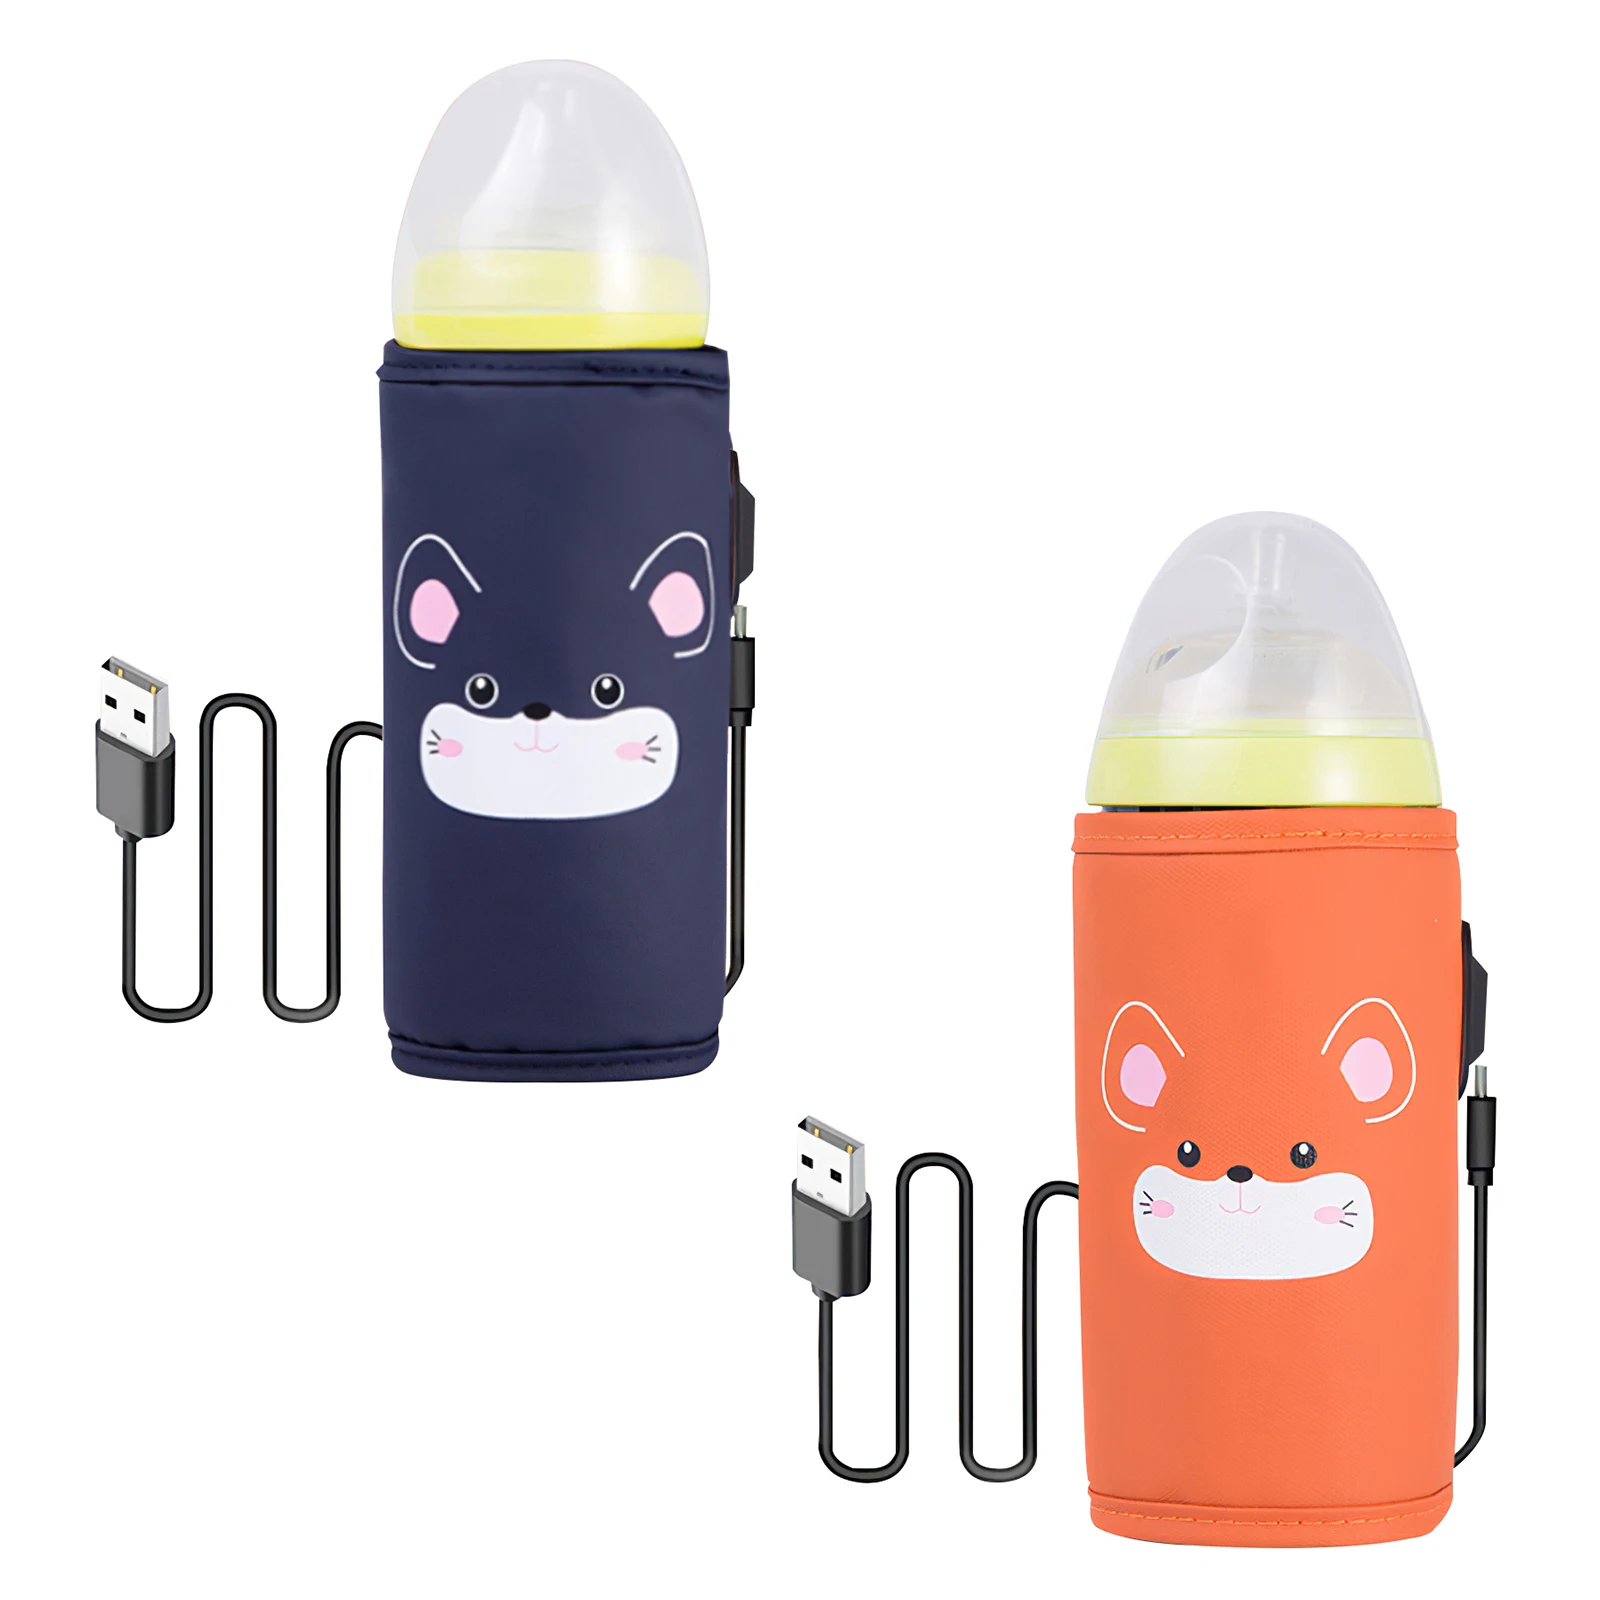 

Portable Travel Milk Warmer USB Baby Bottle Warmer Safety Infant Feeding Bottle Heated Cover Insulation Thermostat Food Heater